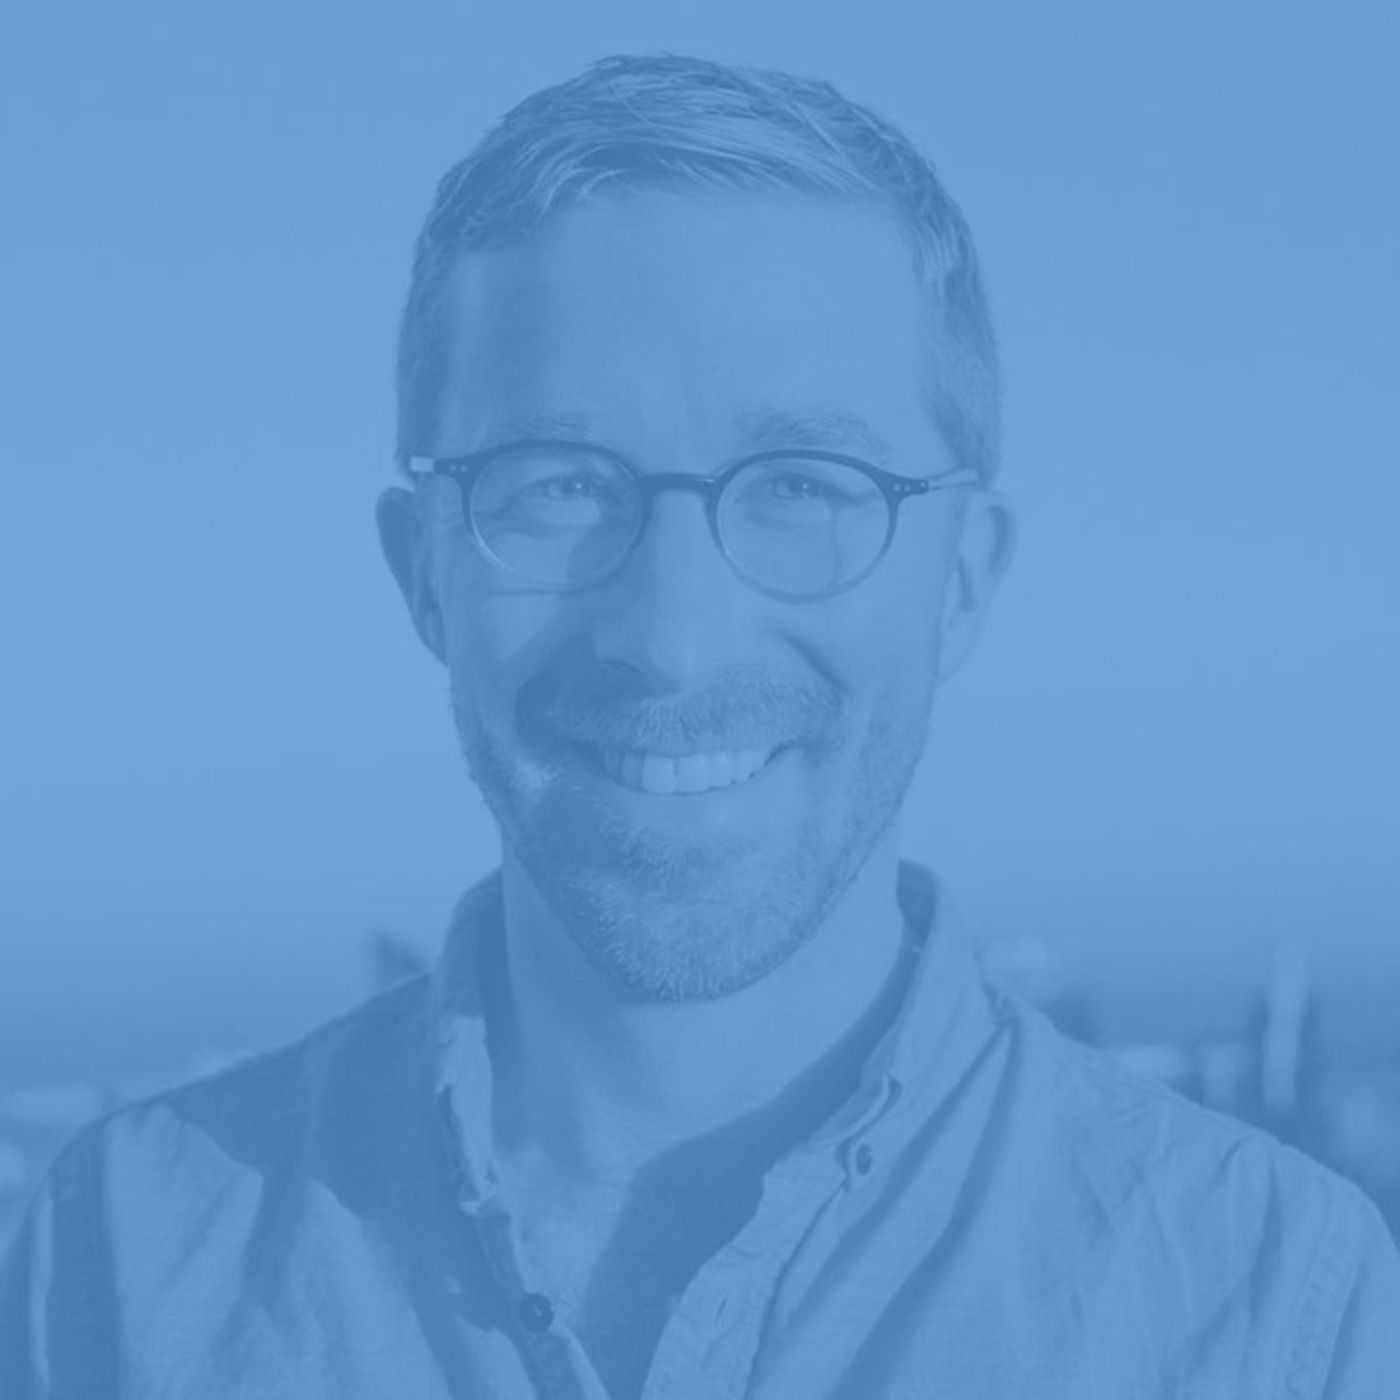 Chris Messina, Developer Experience Lead at Uber